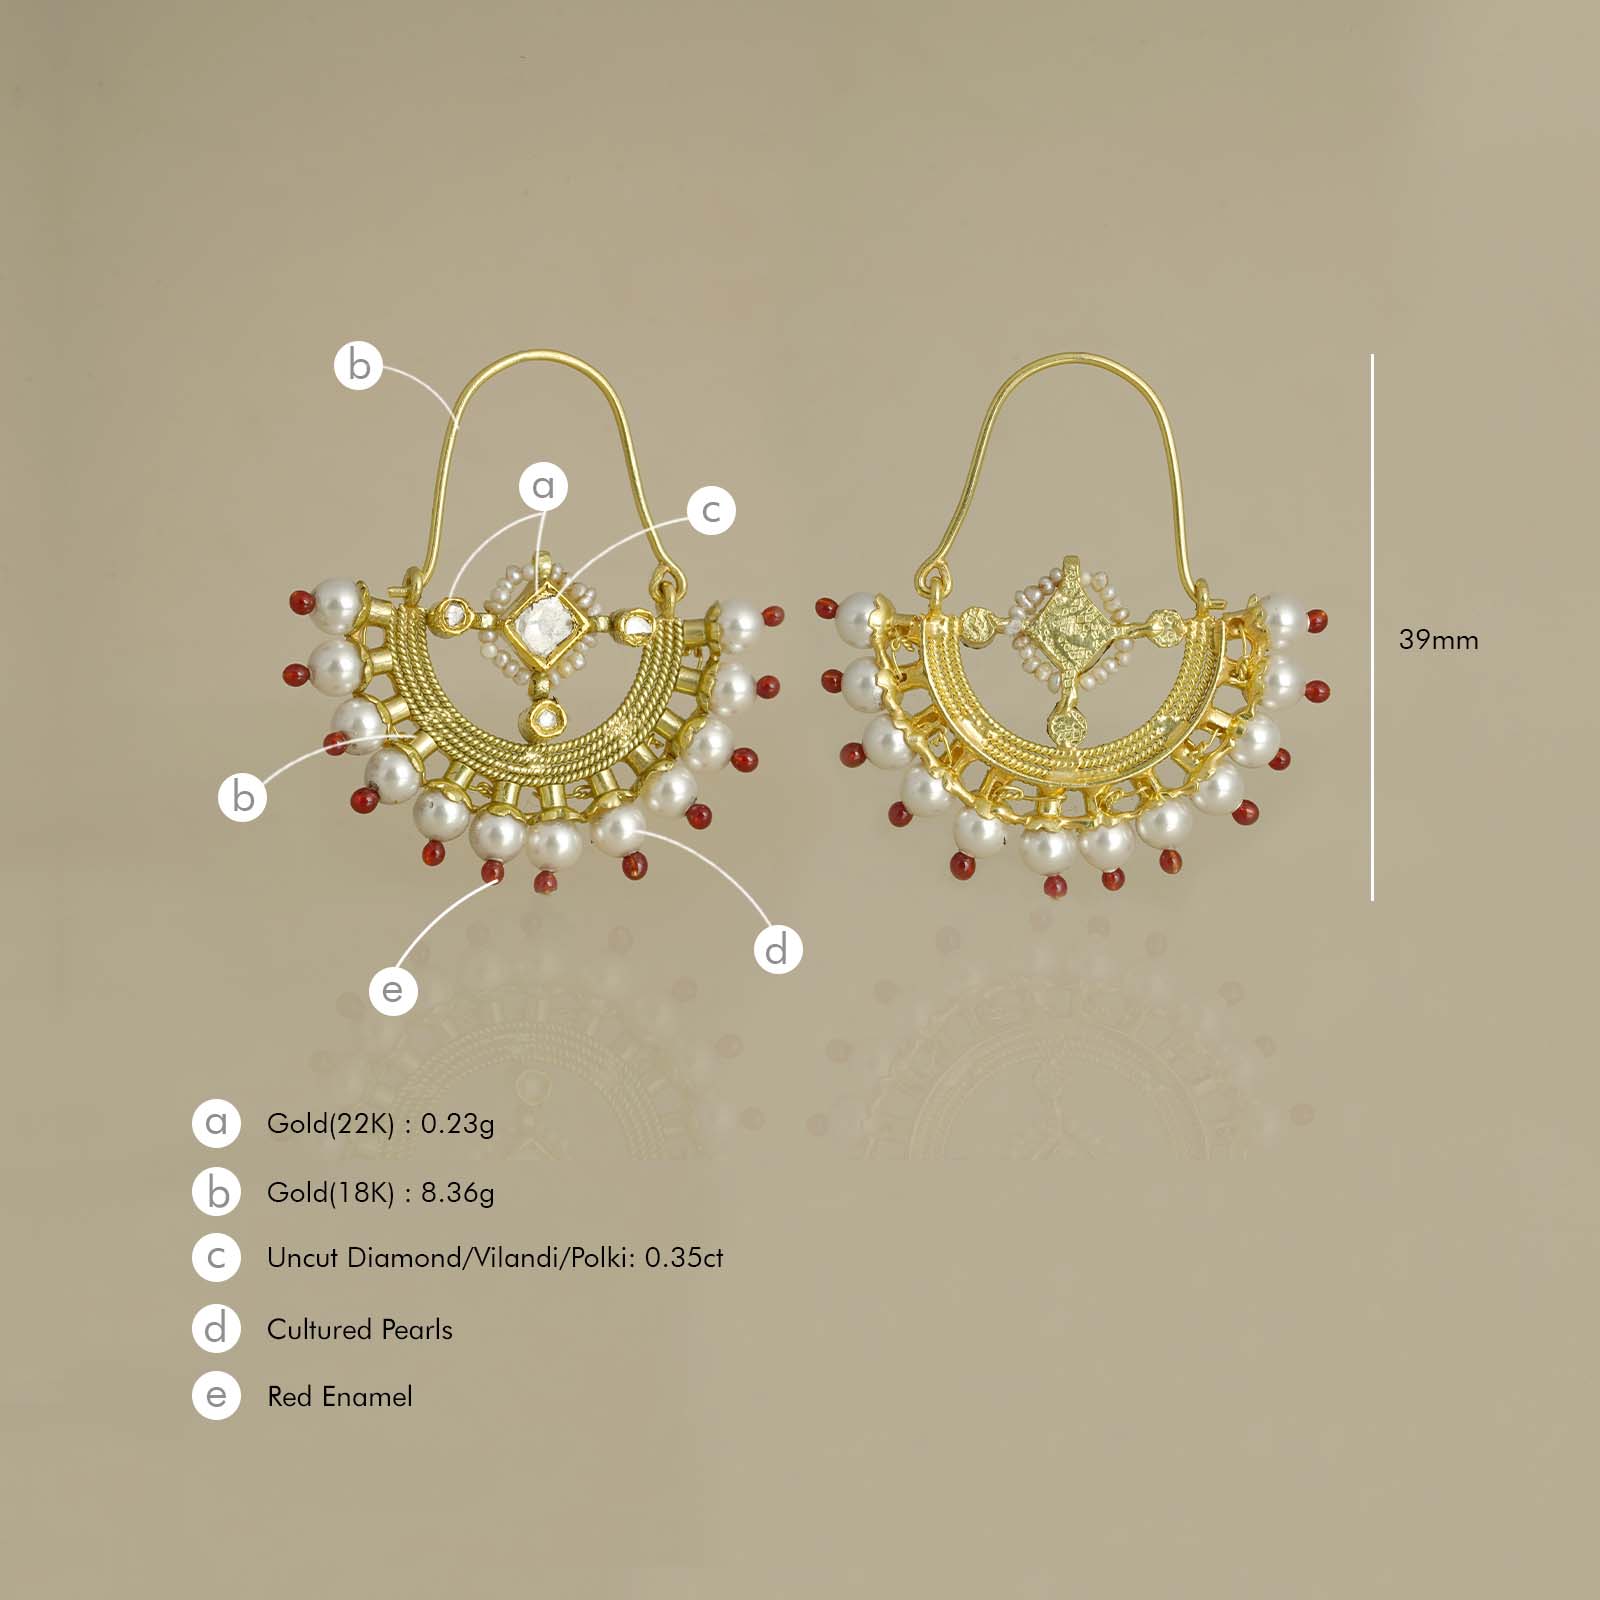 Gold Hoop Earrings With Spiral Design And Leaf Motif